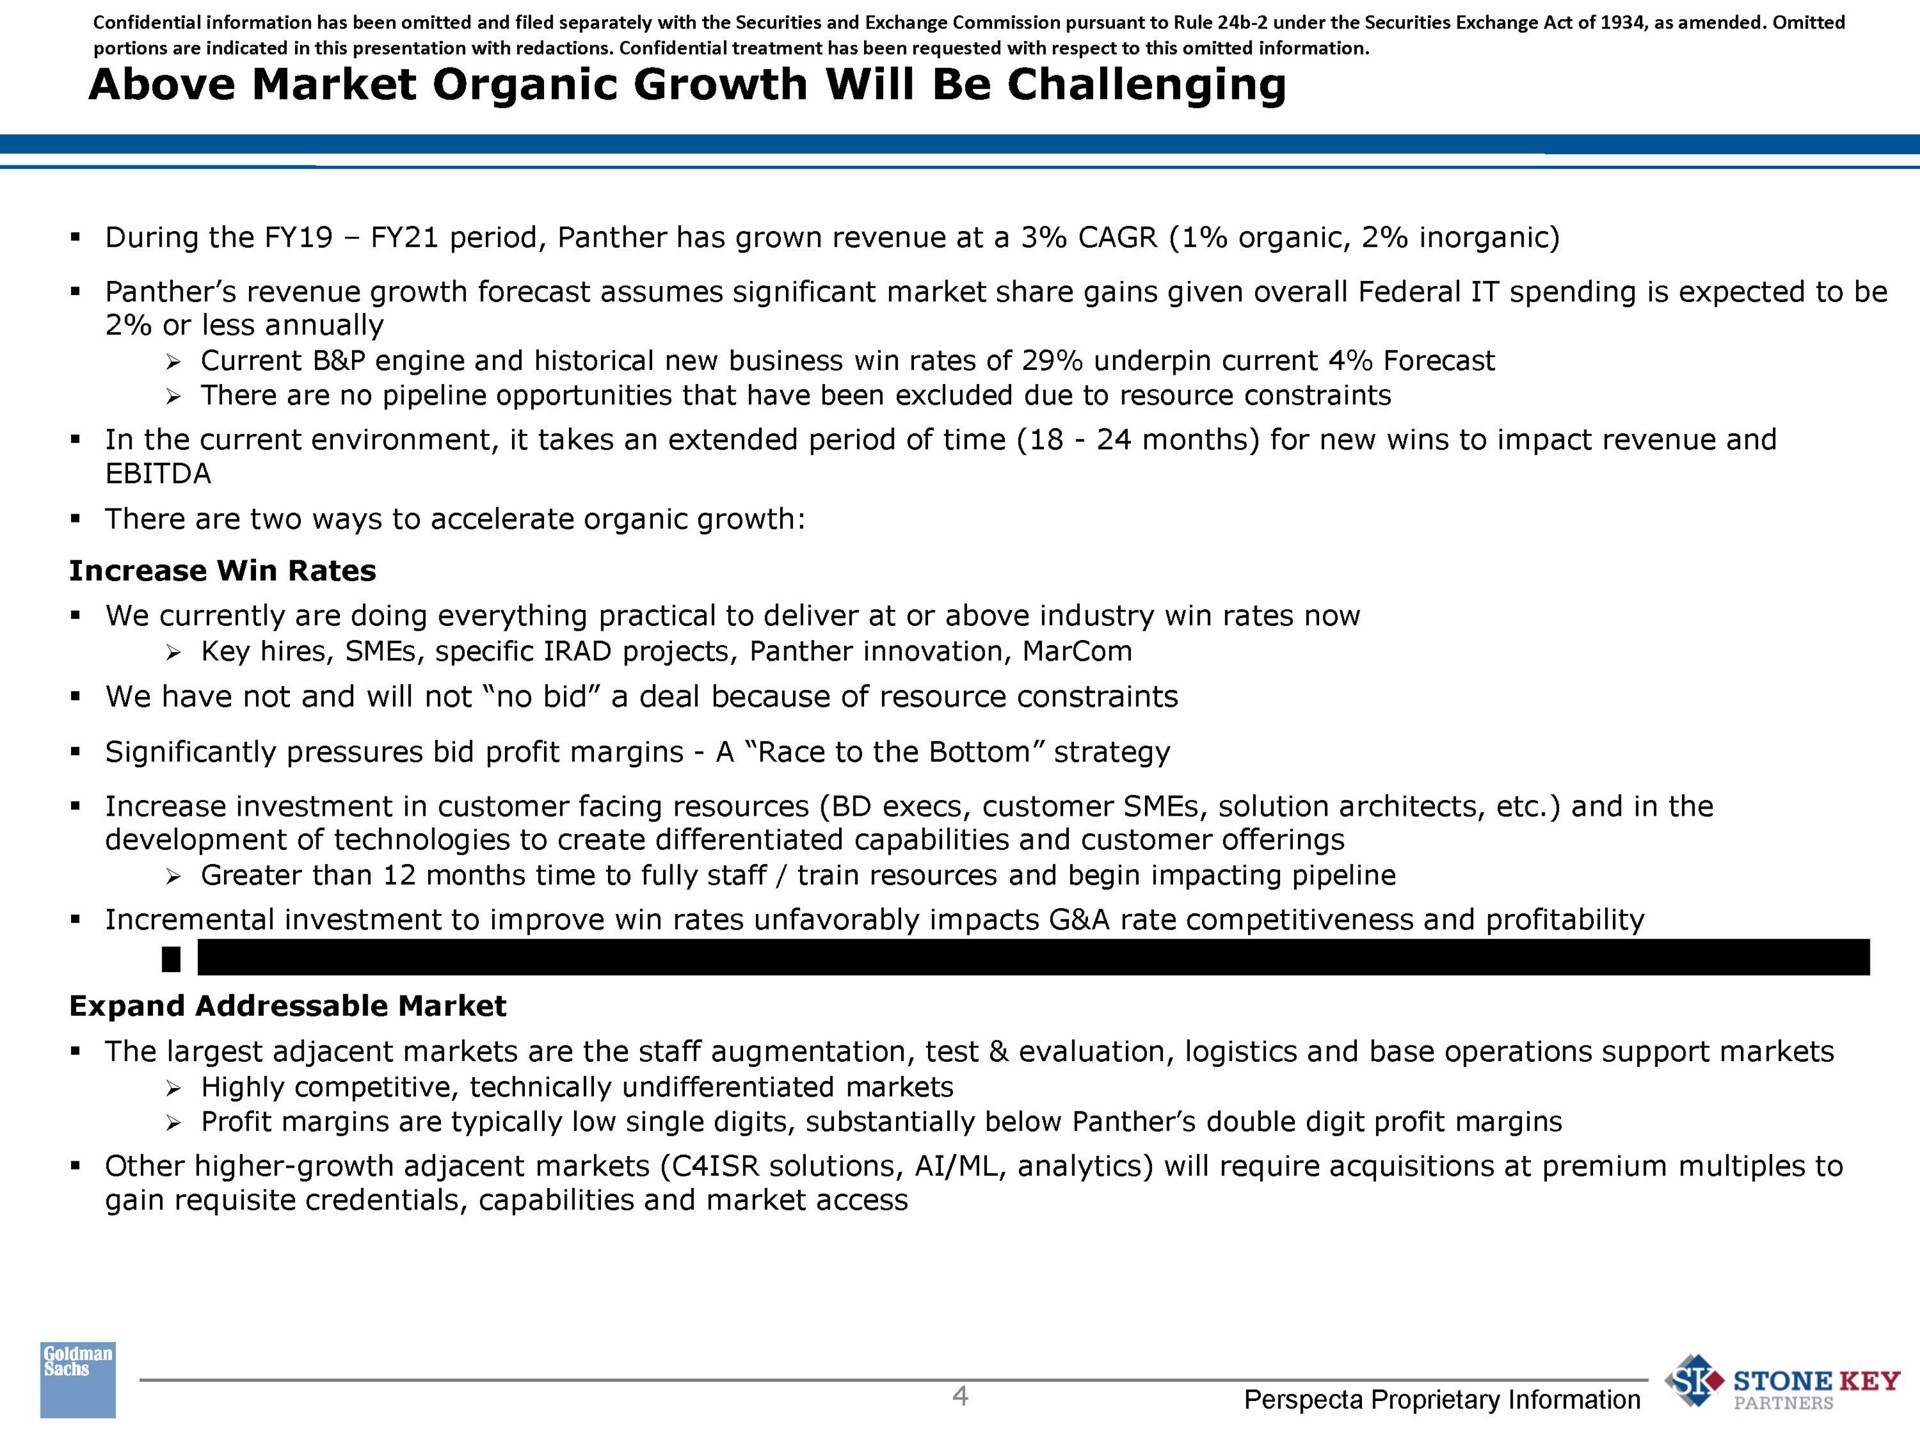 above market organic growth will be challenging expand market | Perspecta